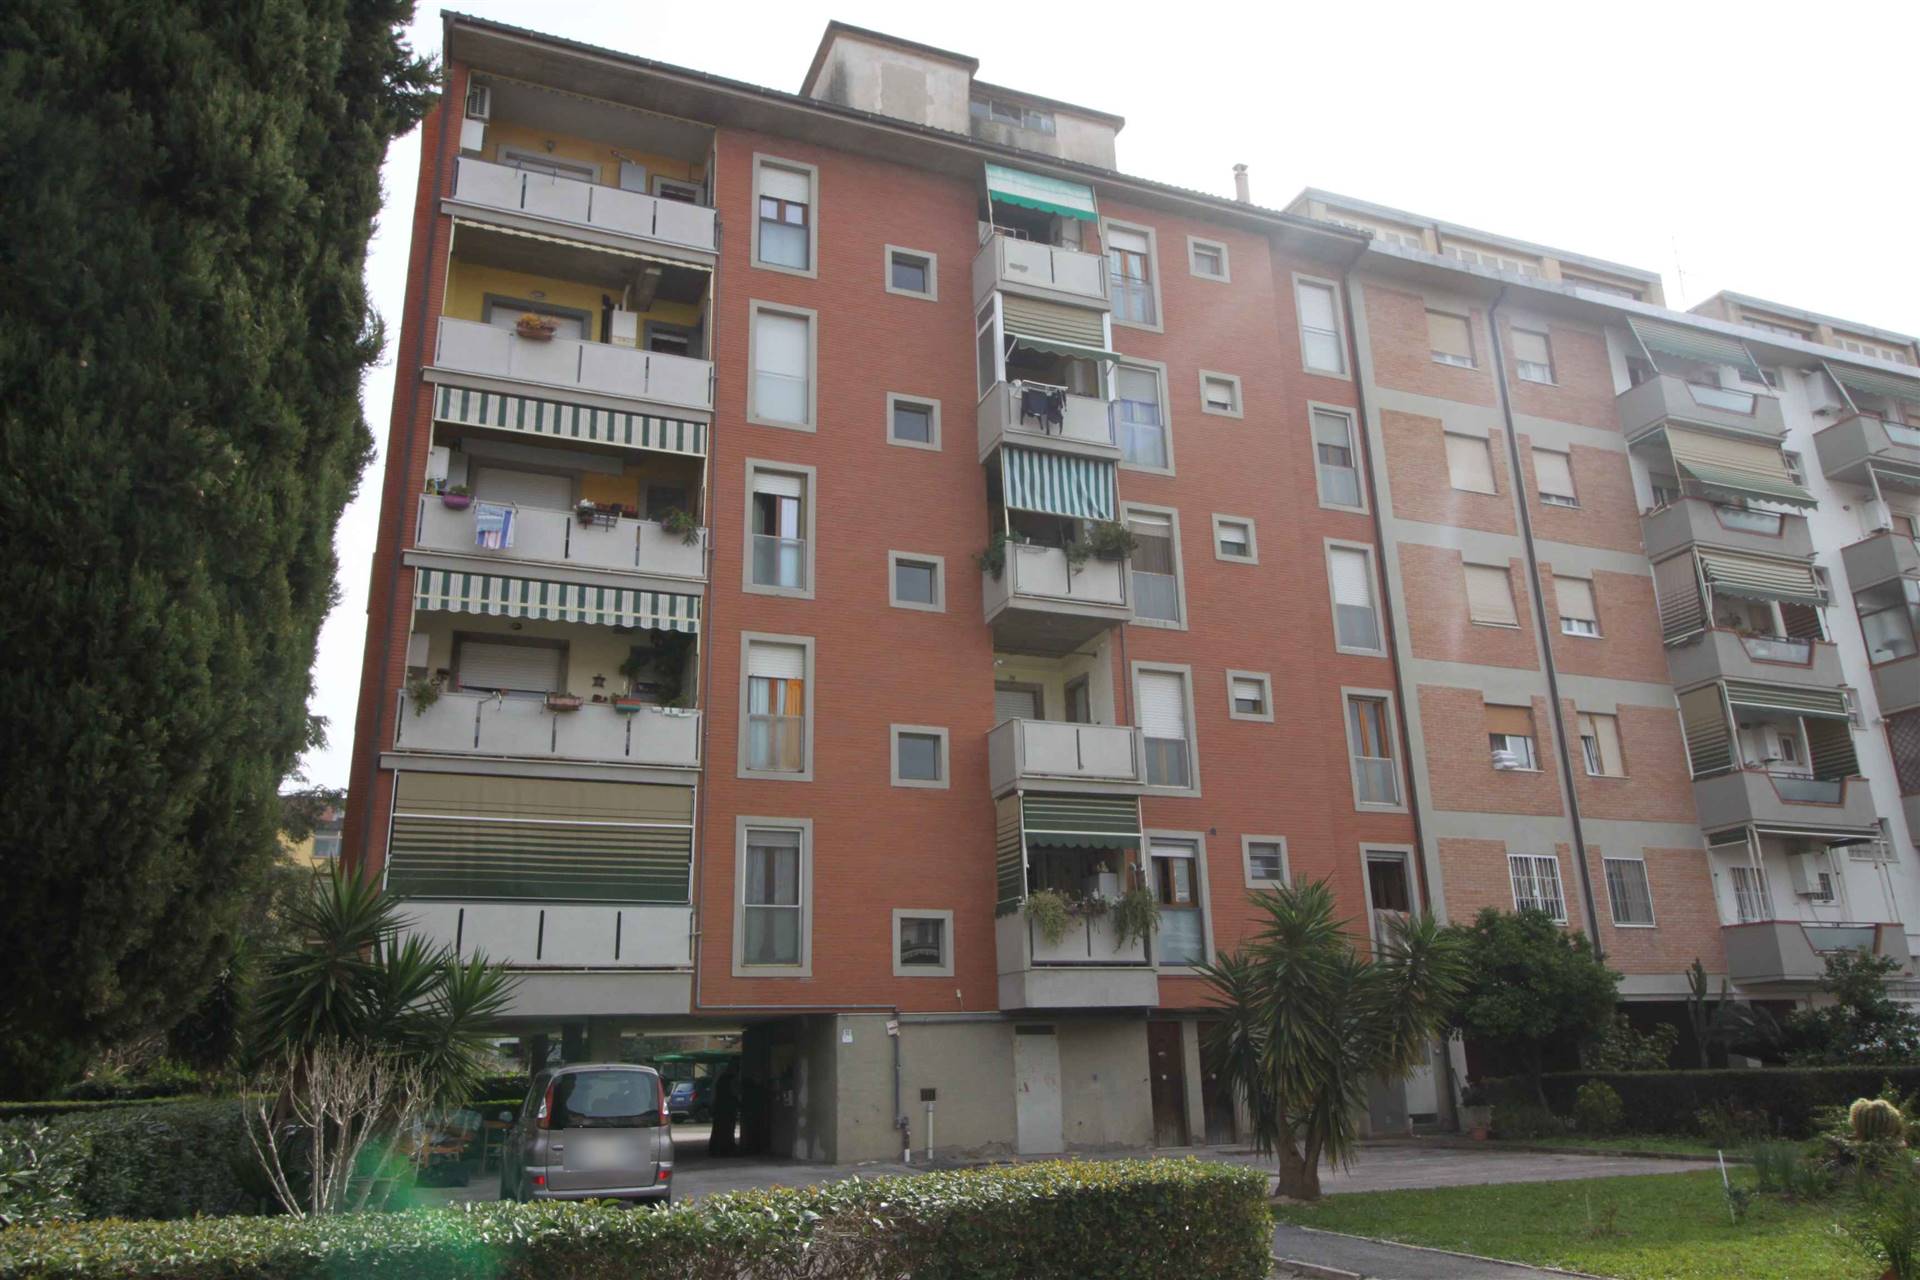 GORARELLA, GROSSETO, Apartment for sale of 75 Sq. mt., Be restored, Heating Individual heating system, Energetic class: E, placed at 2° on 5, 